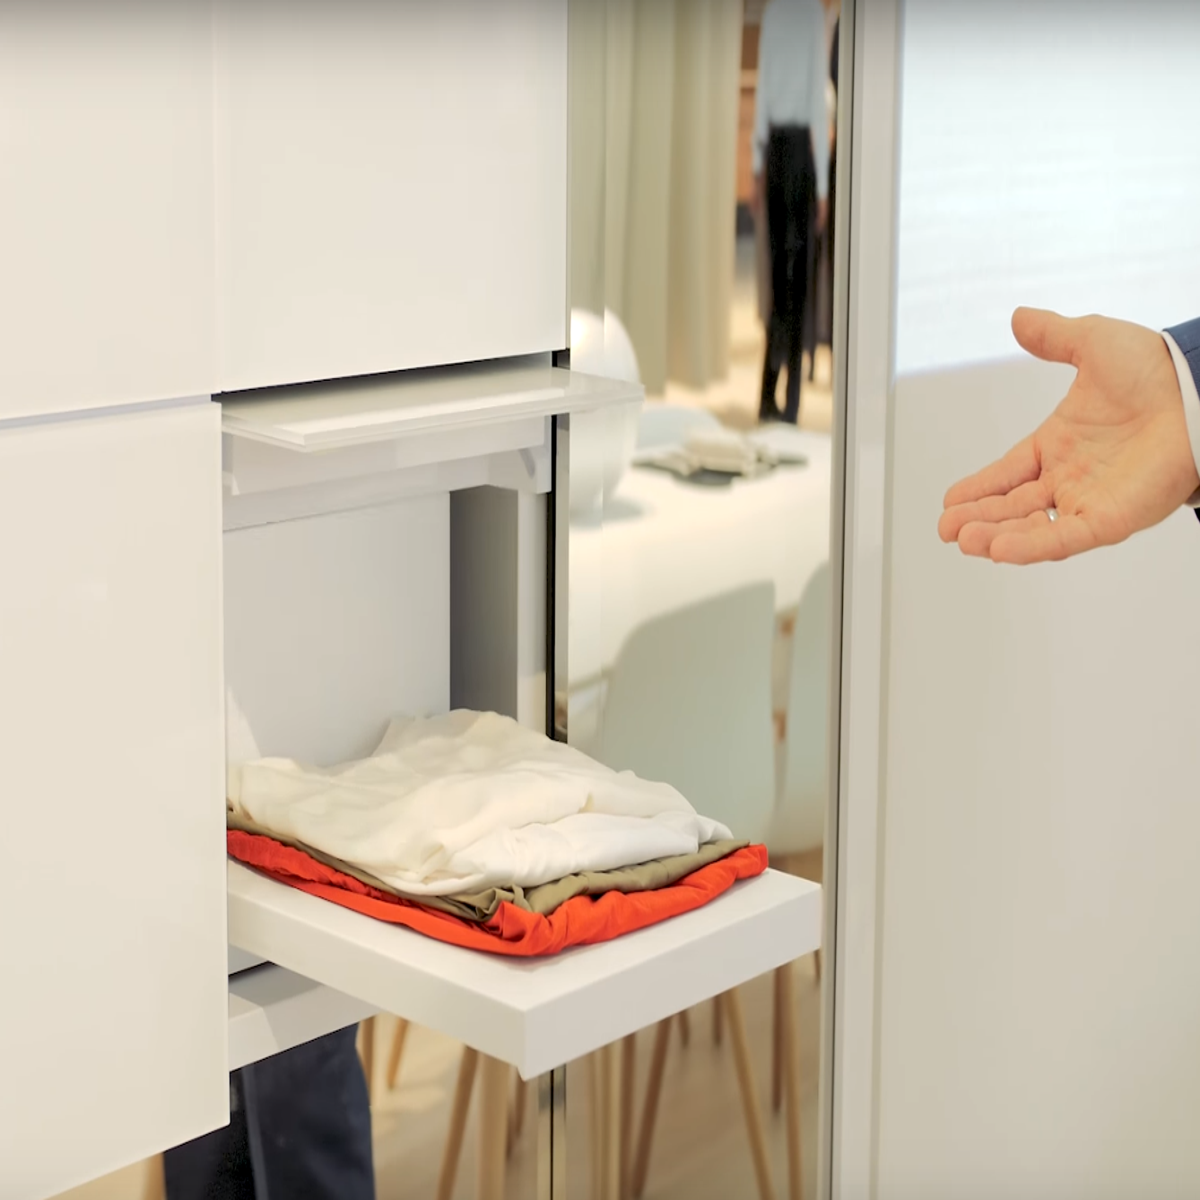 This $16,000 robot uses artificial intelligence to sort and fold laundry -  The Verge